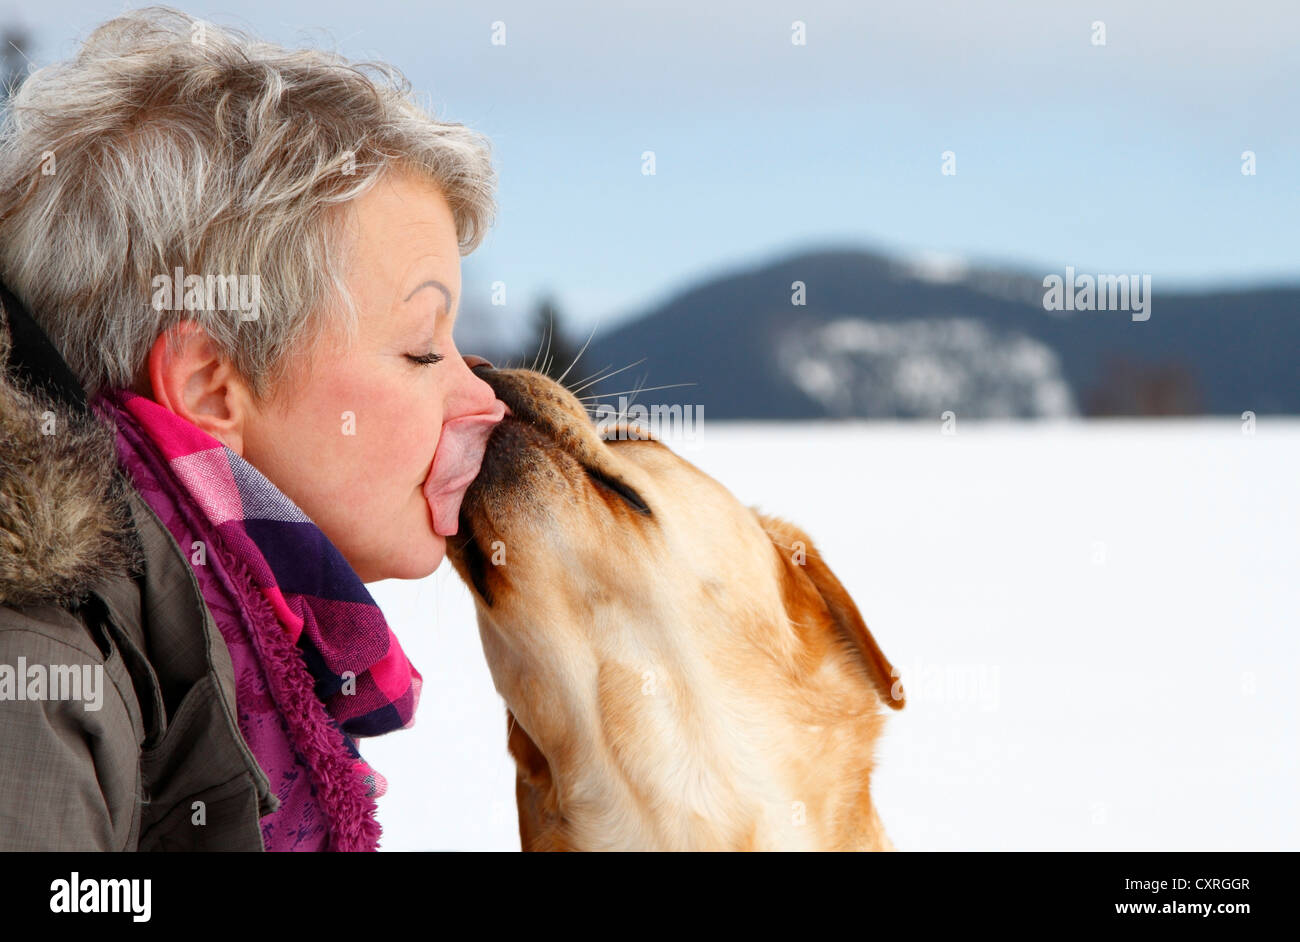 Woman having face licked by Golden Retriever, Thuringia, Germany, Europe Stock Photo